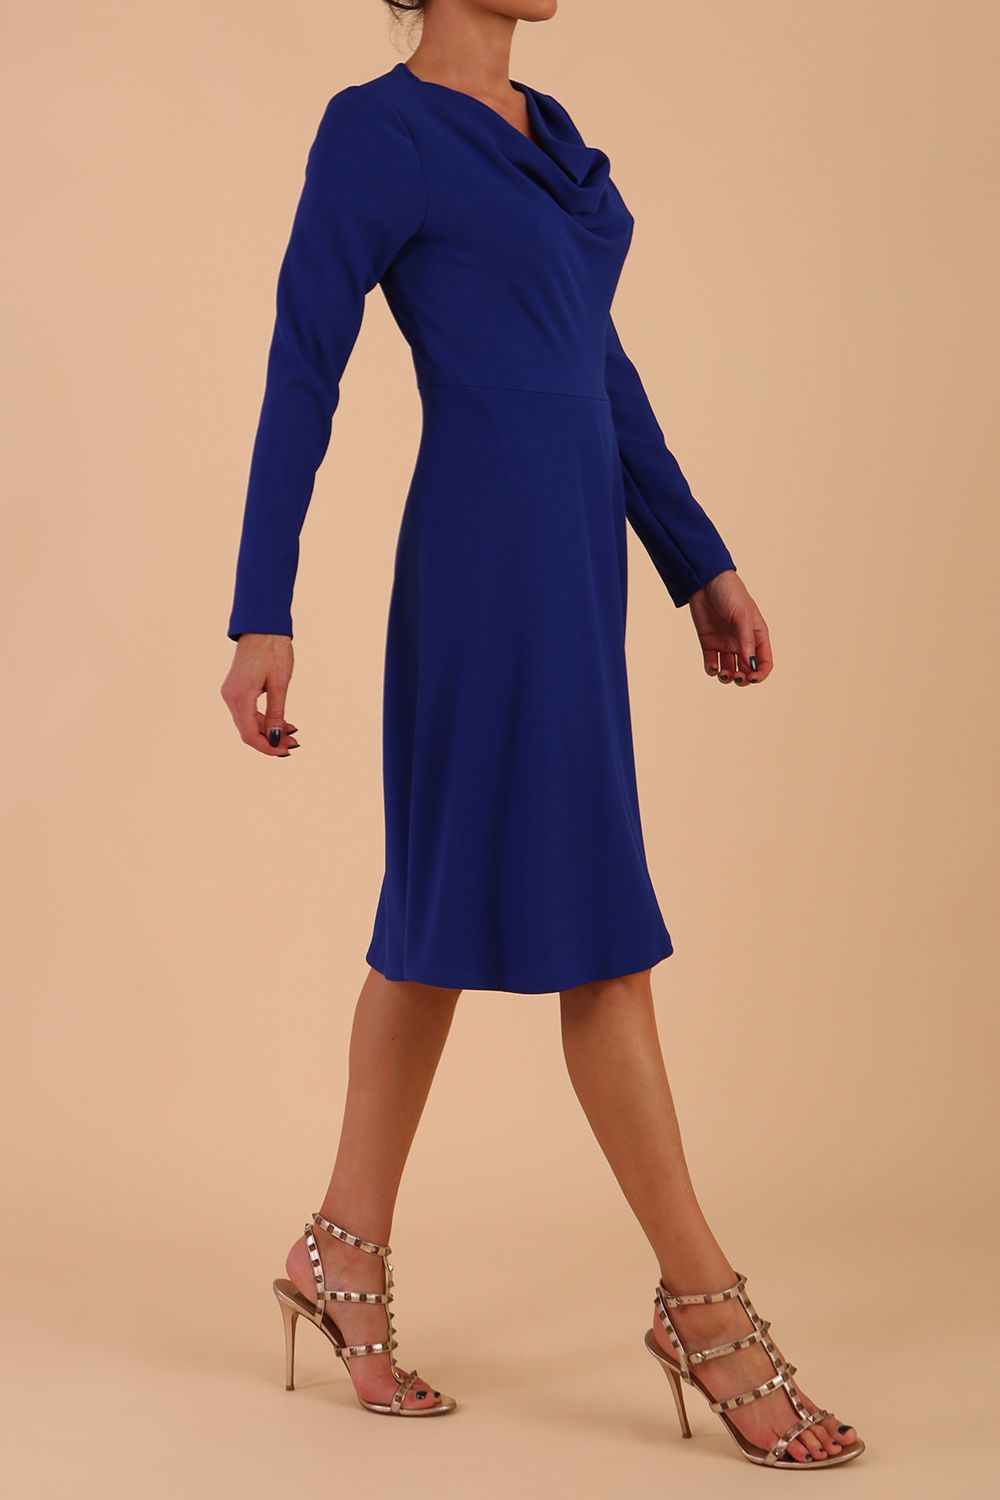 model is wearing diva catwalk moraig swing long sleeve dress with high cowl neckline and wrap skirt in cobalt blue front side